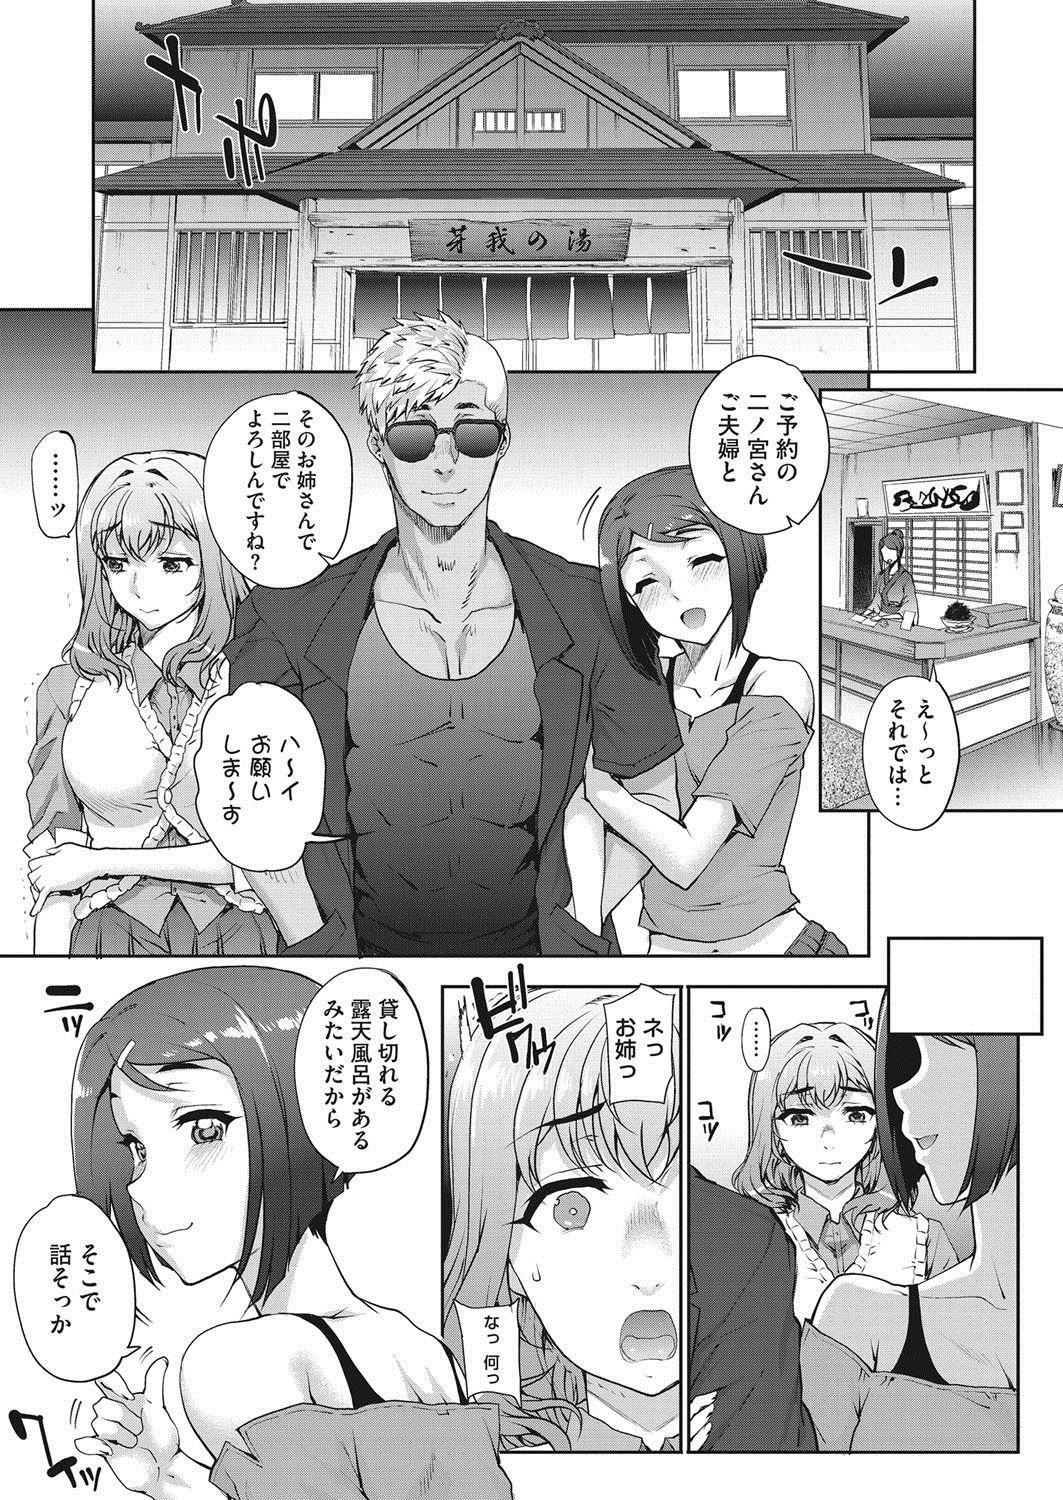 [Carn] Tanshinfunin ~Sisters~ Ch 1-7 61